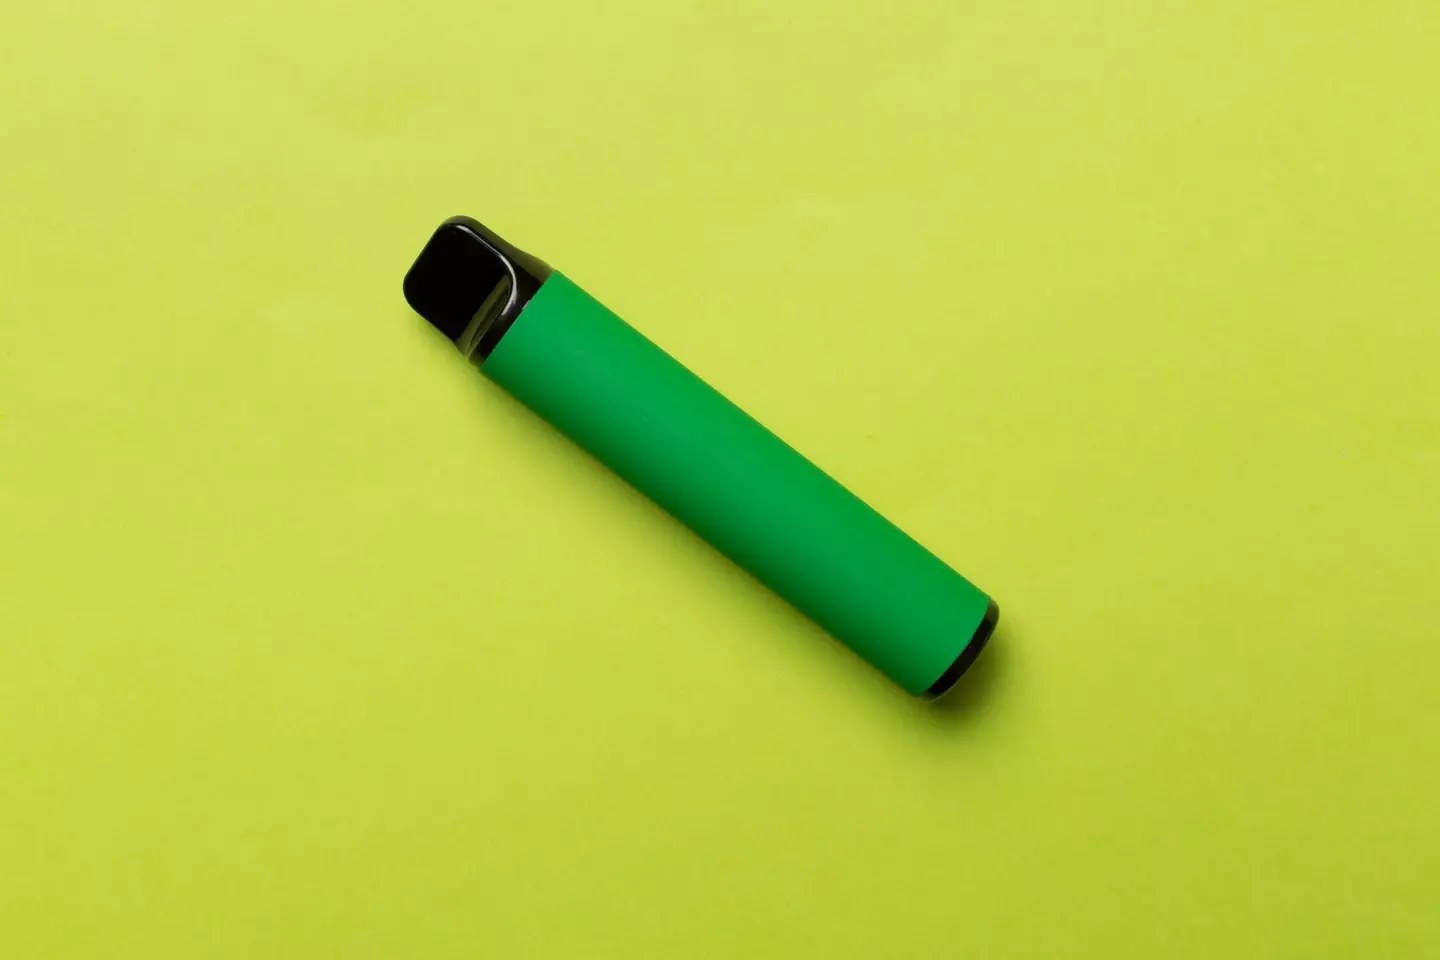 A study suggested green vapes could be more harmful.